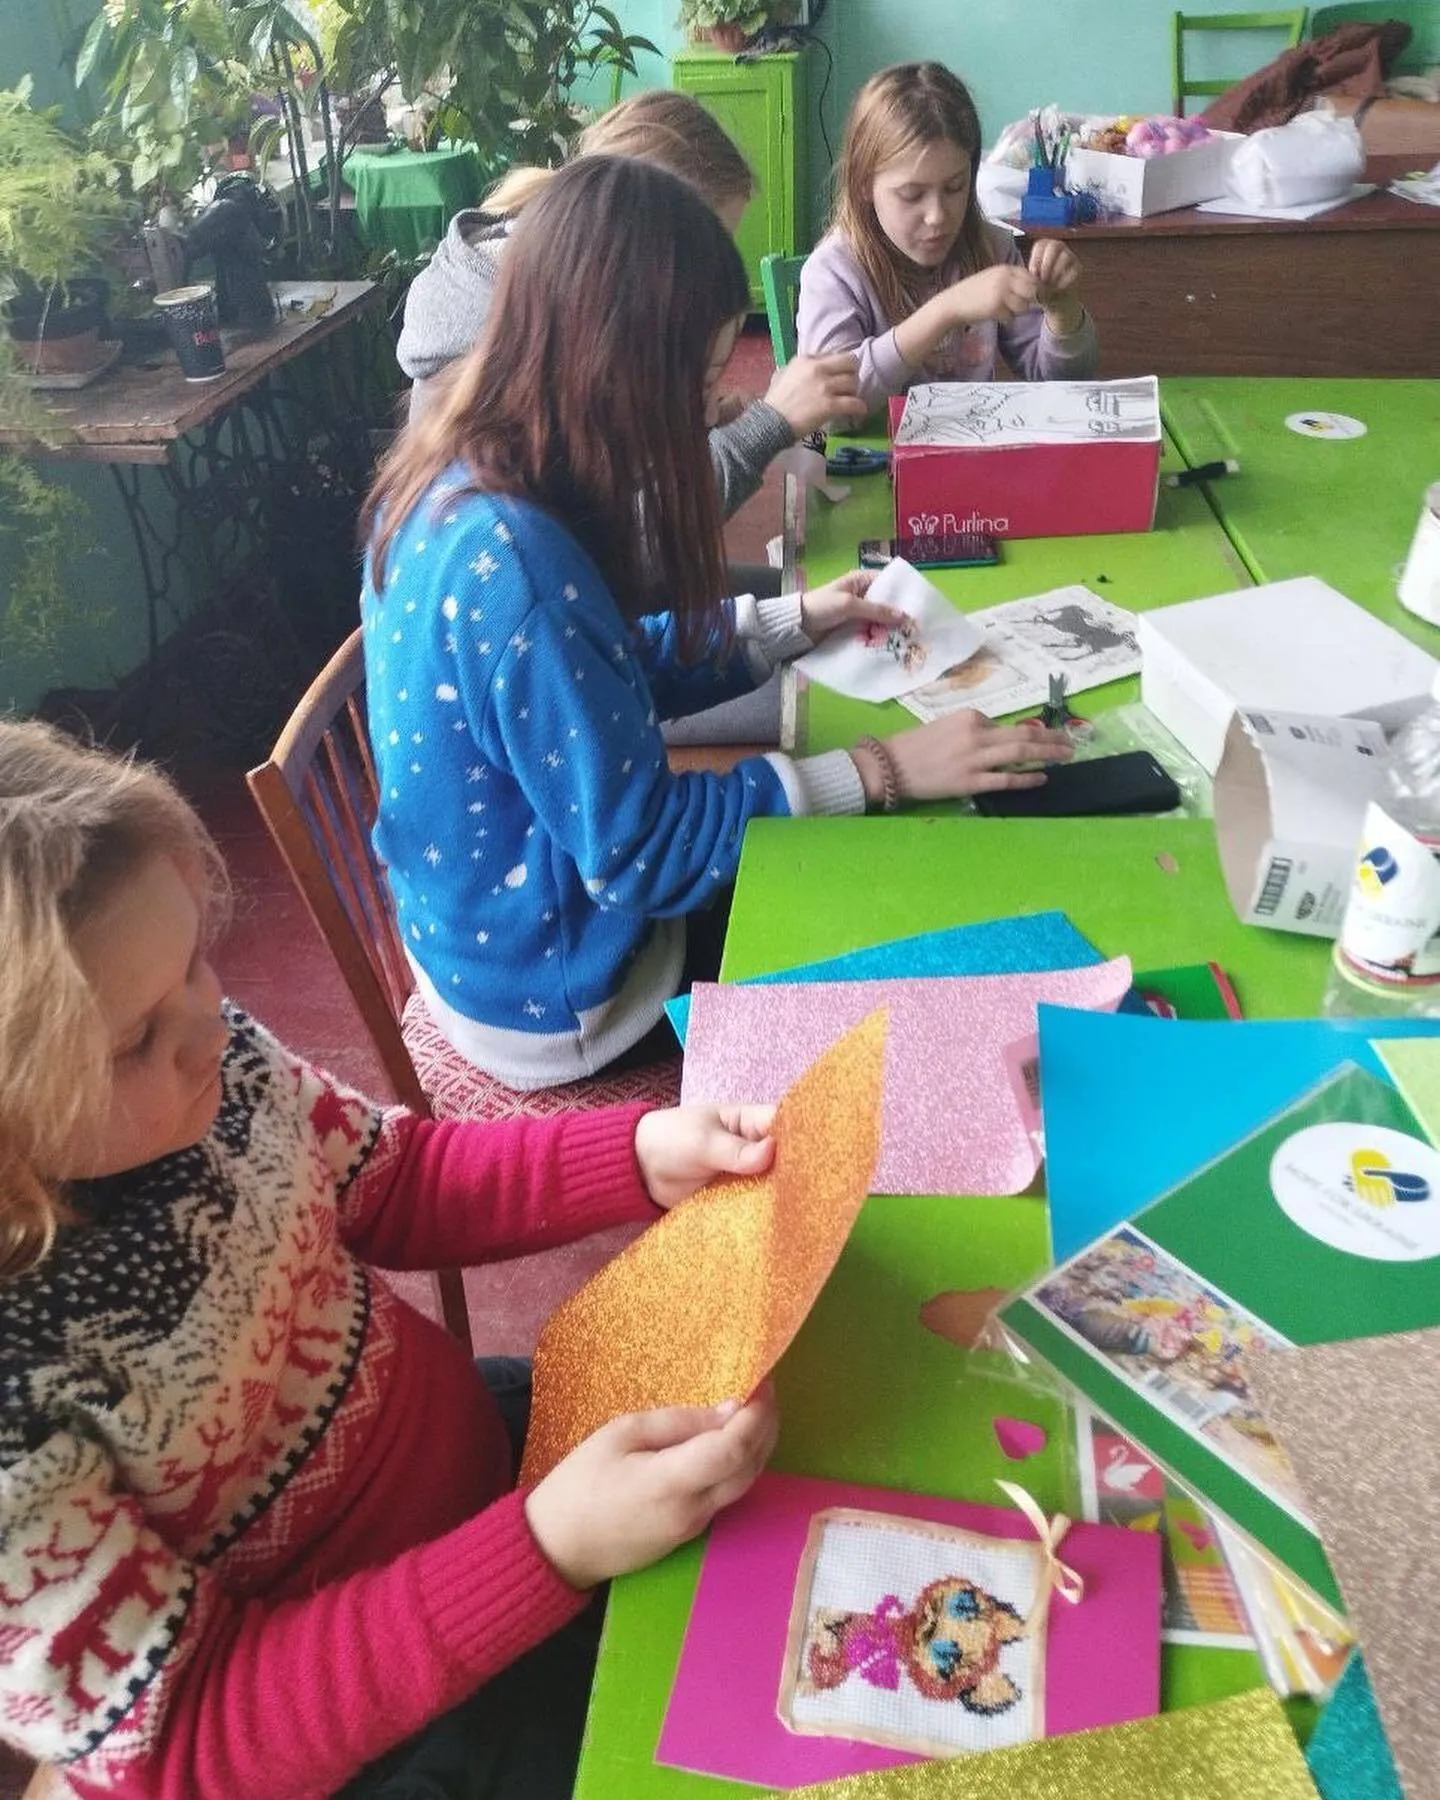 a group of girls sitting at a table working on crafts.